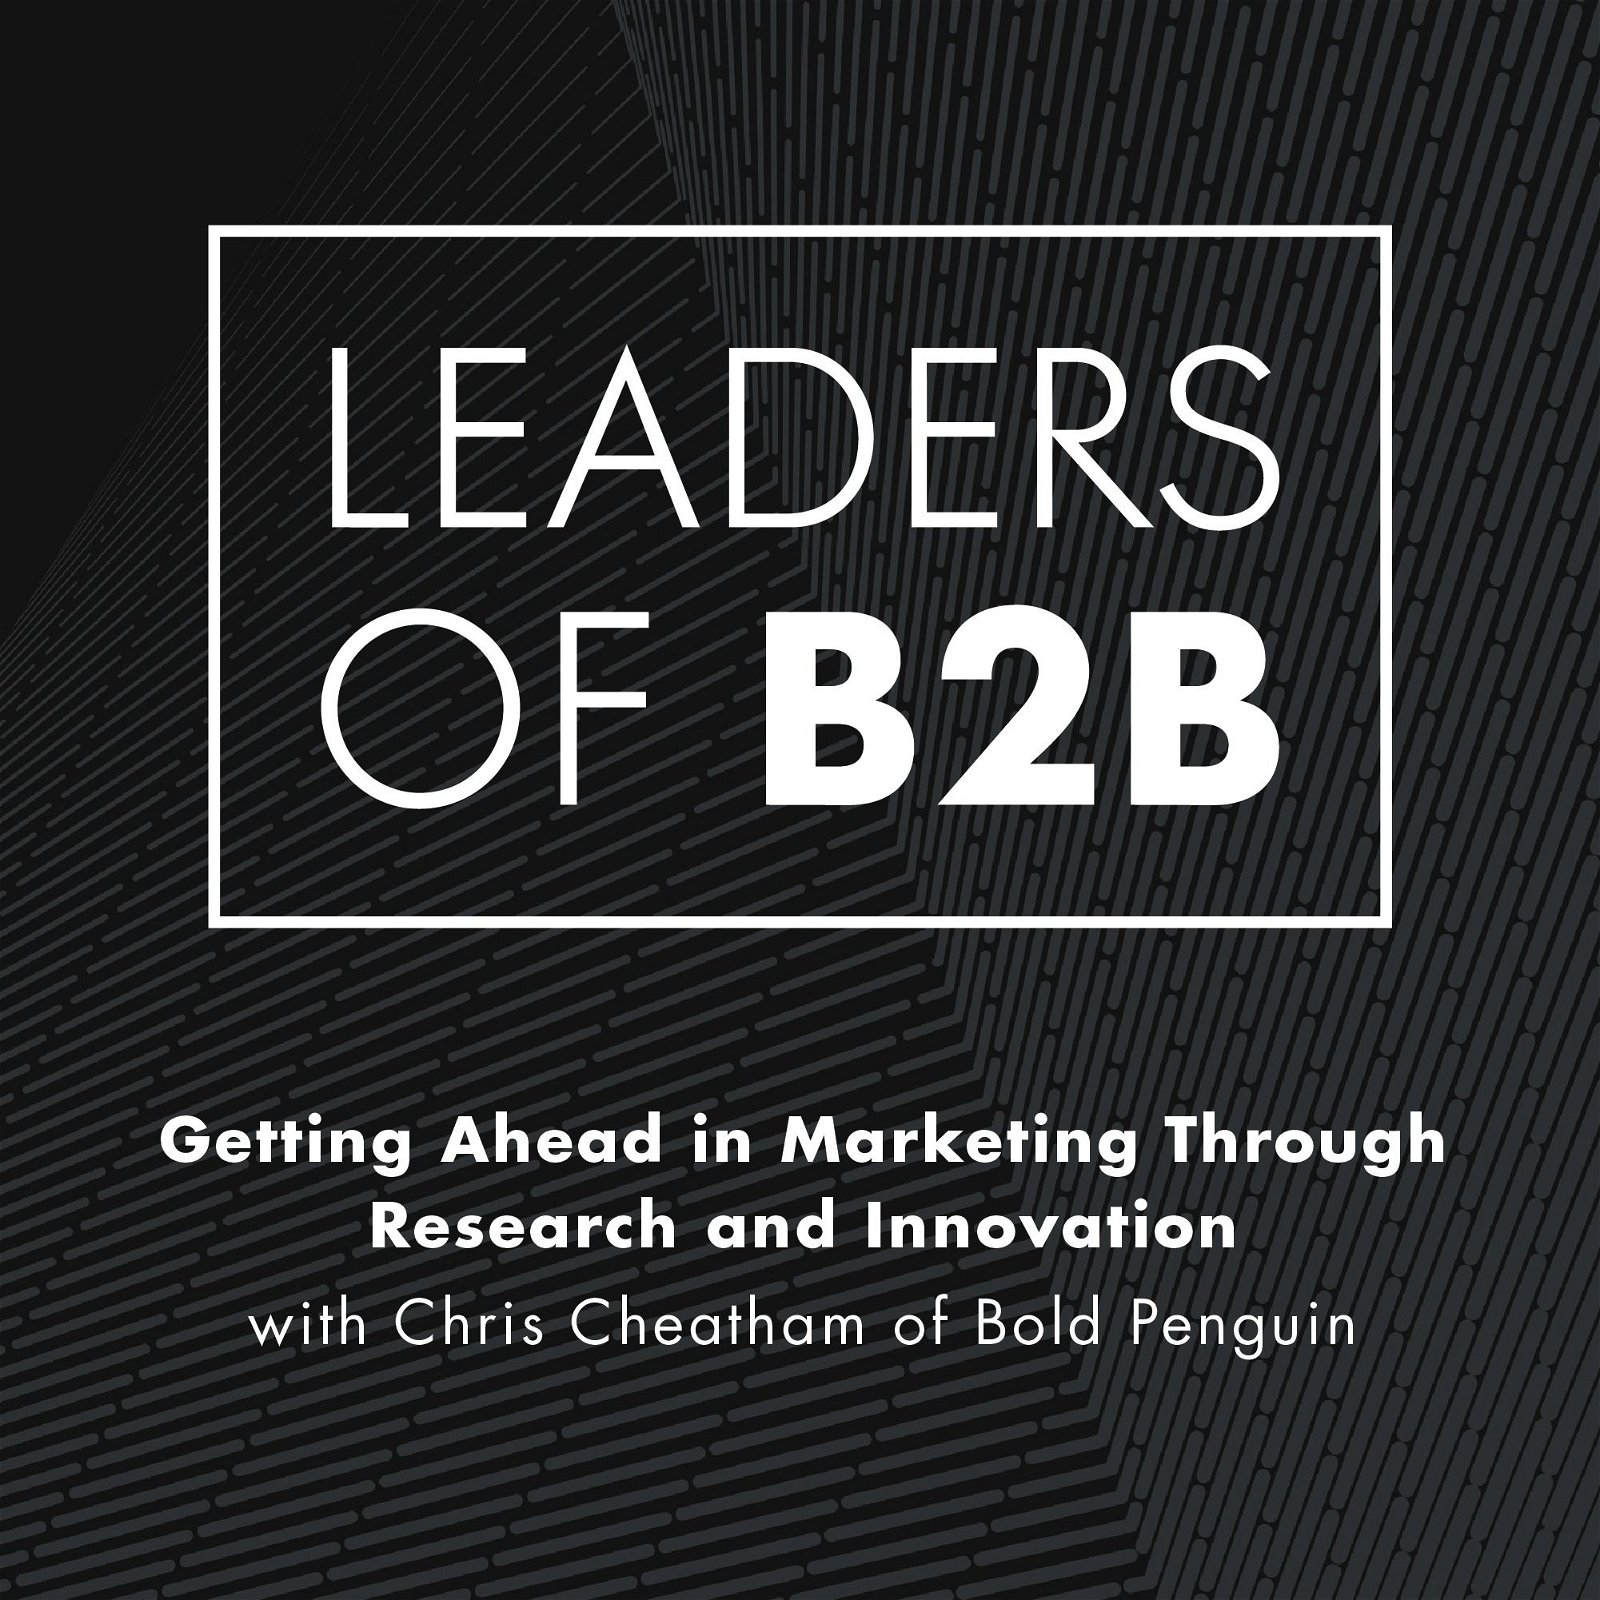 Getting Ahead in Marketing Through Research and Innovation with Chris Cheatham of Bold Penguin